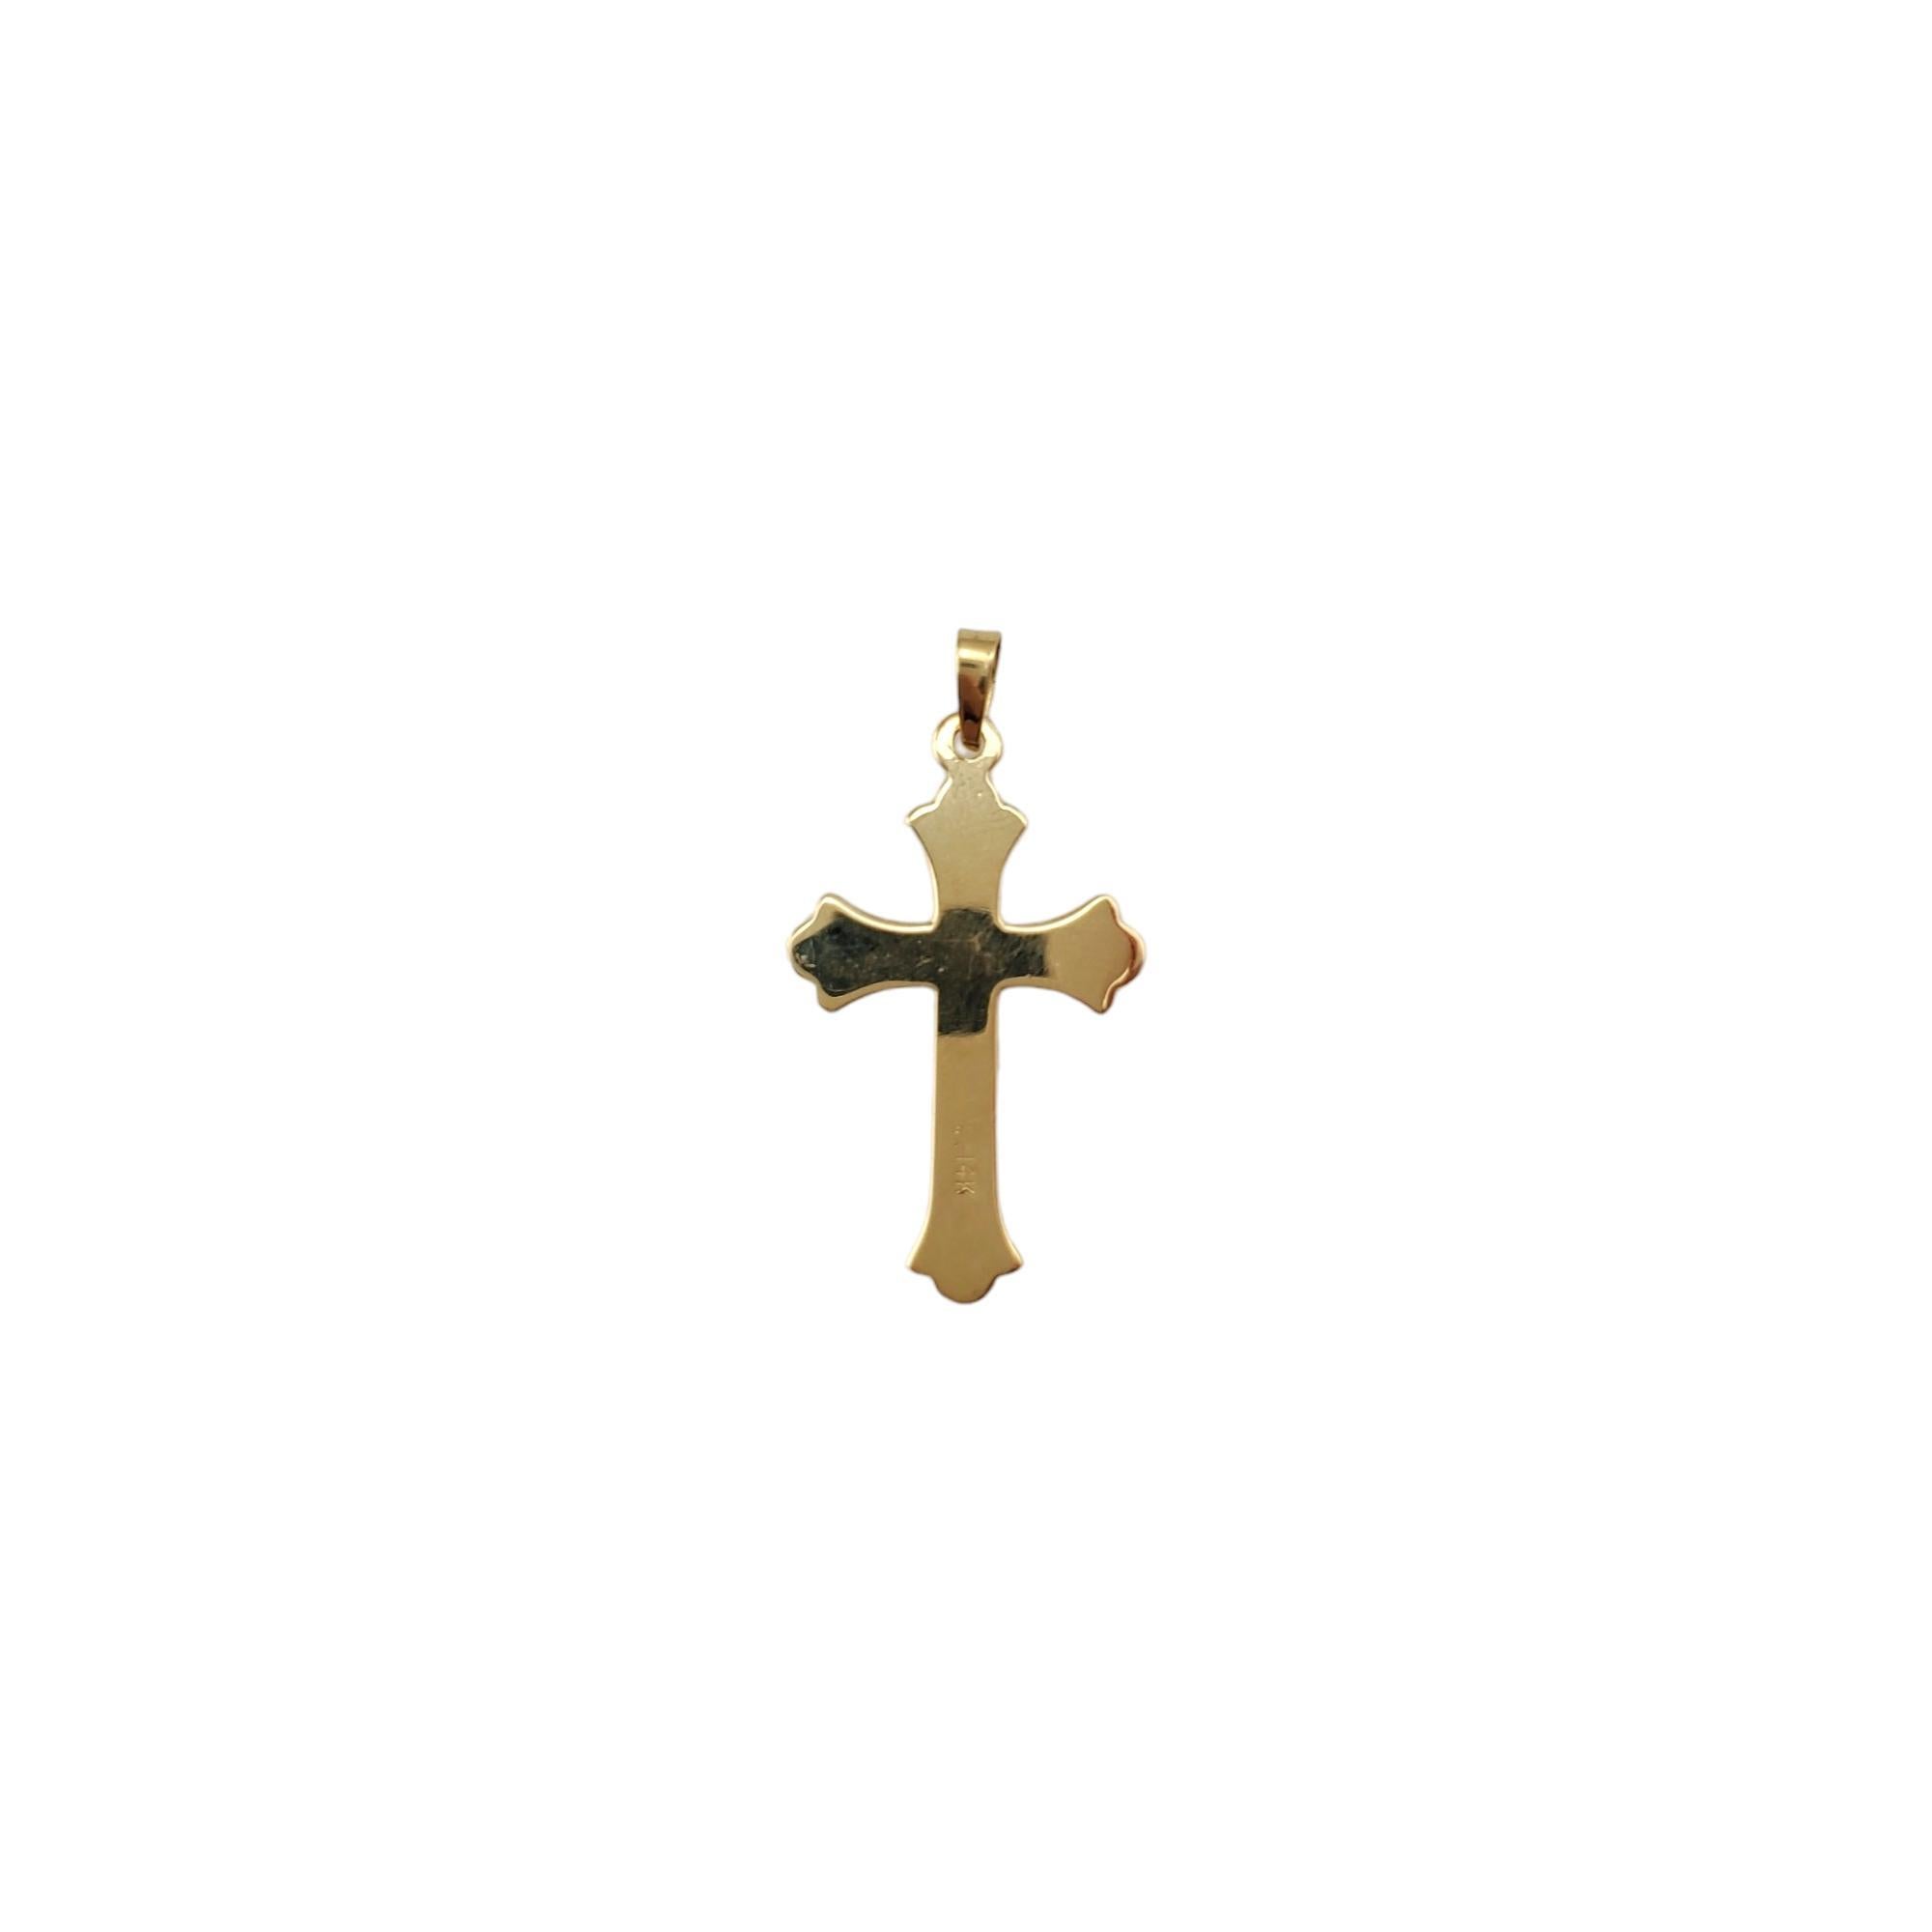 14K Two-Tone Crucifix Pendant

Detailed cross crucifix pendant in 14K white/yellow gold.

Hallmark: 14K

Weight: 1.09 dwt/ 1.69 g

Length w/ bail: 33.75 mm

Size: 29.38 mm X 17.88 mm X 2.52 mm

Very good condition, professionally polished.

Will